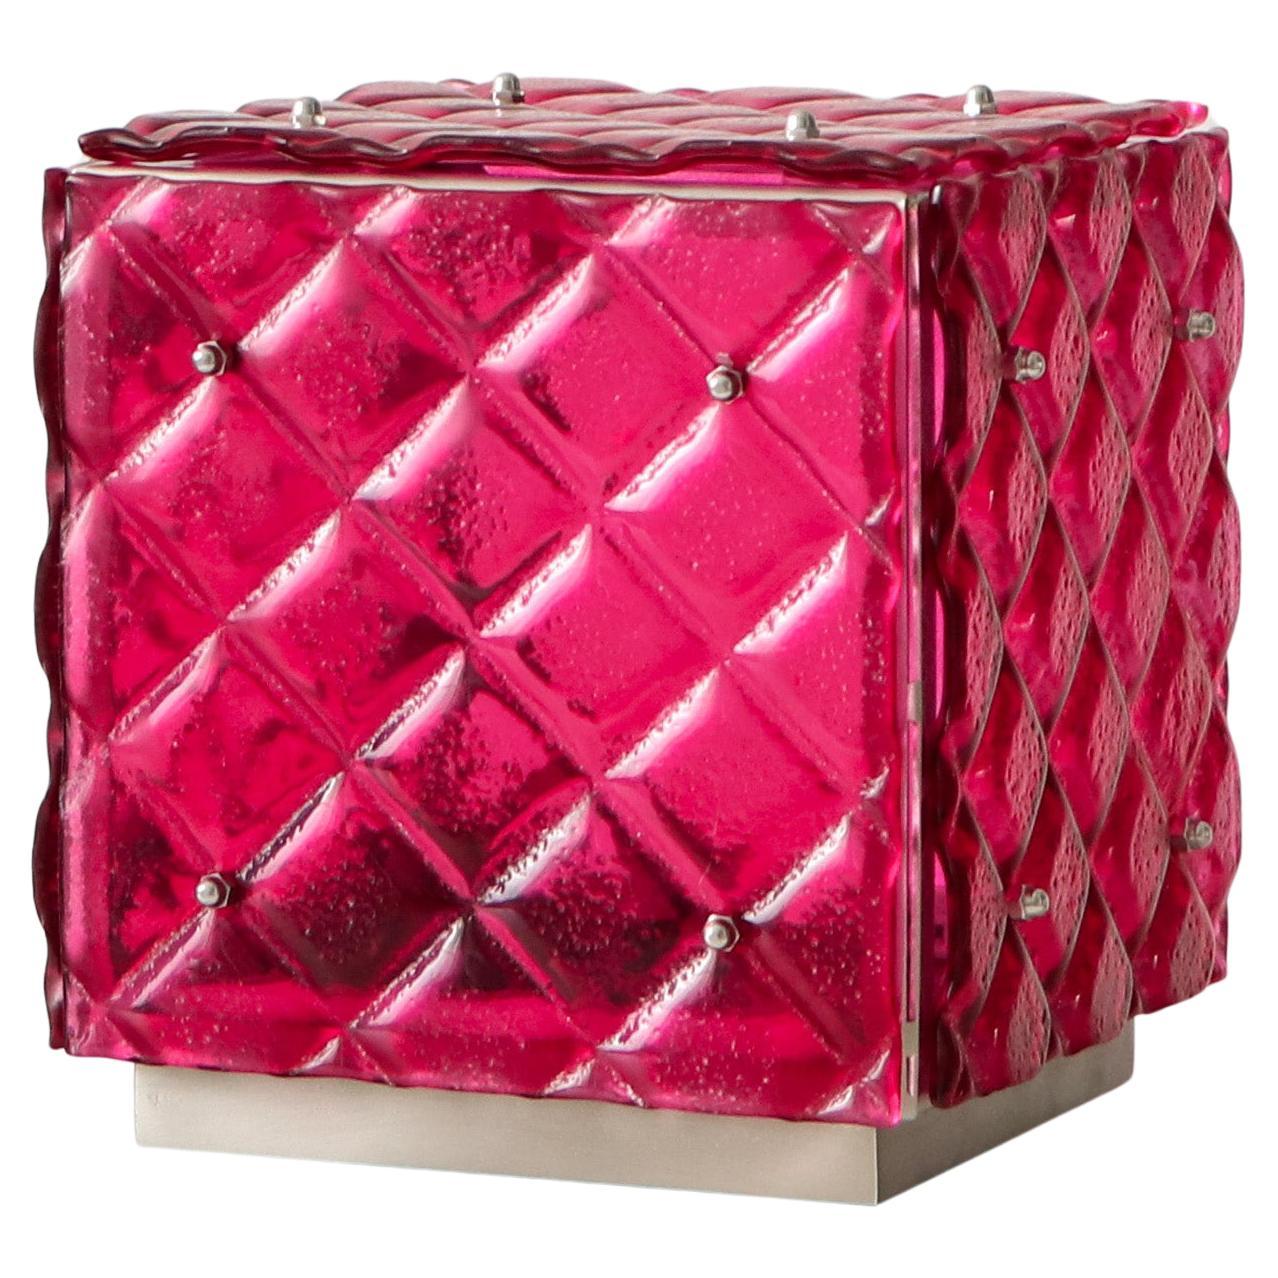 Contemporary Functional Art Ambient Fucsia Coloured Light Artisanal Fused Glass